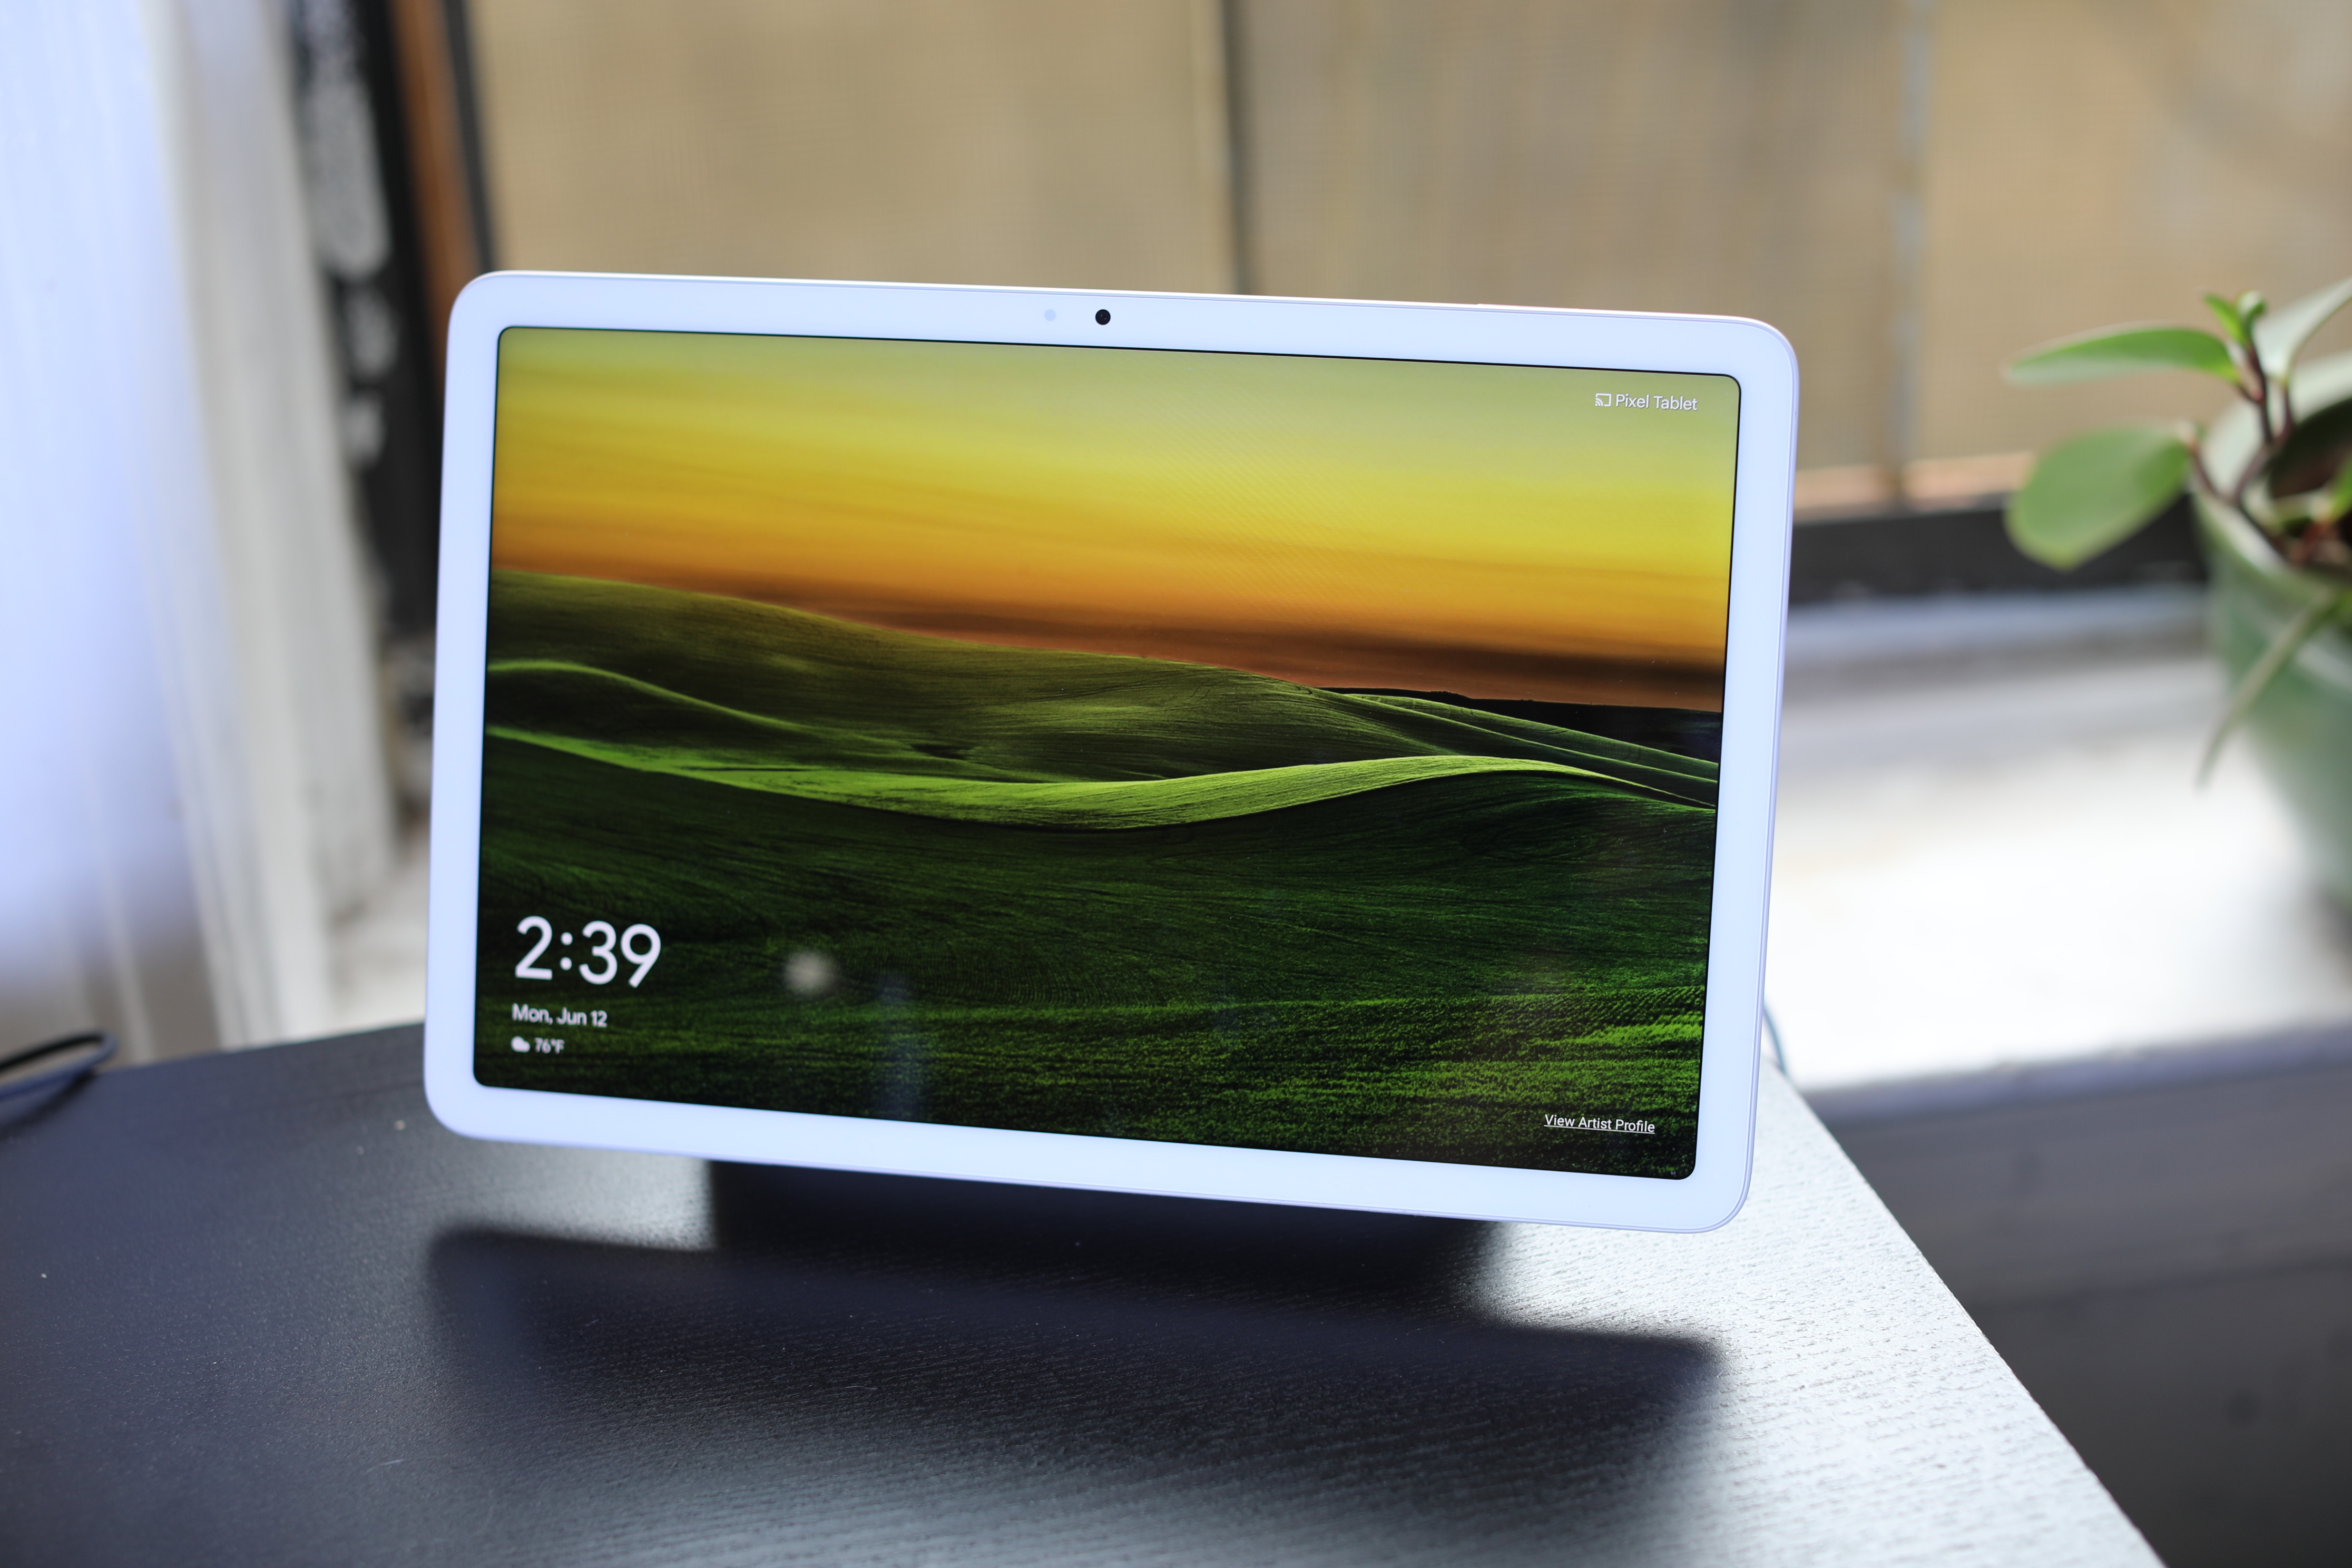 Pórtico Robusto Respectivamente Google Pixel Tablet review: It's all about the dock | TechCrunch